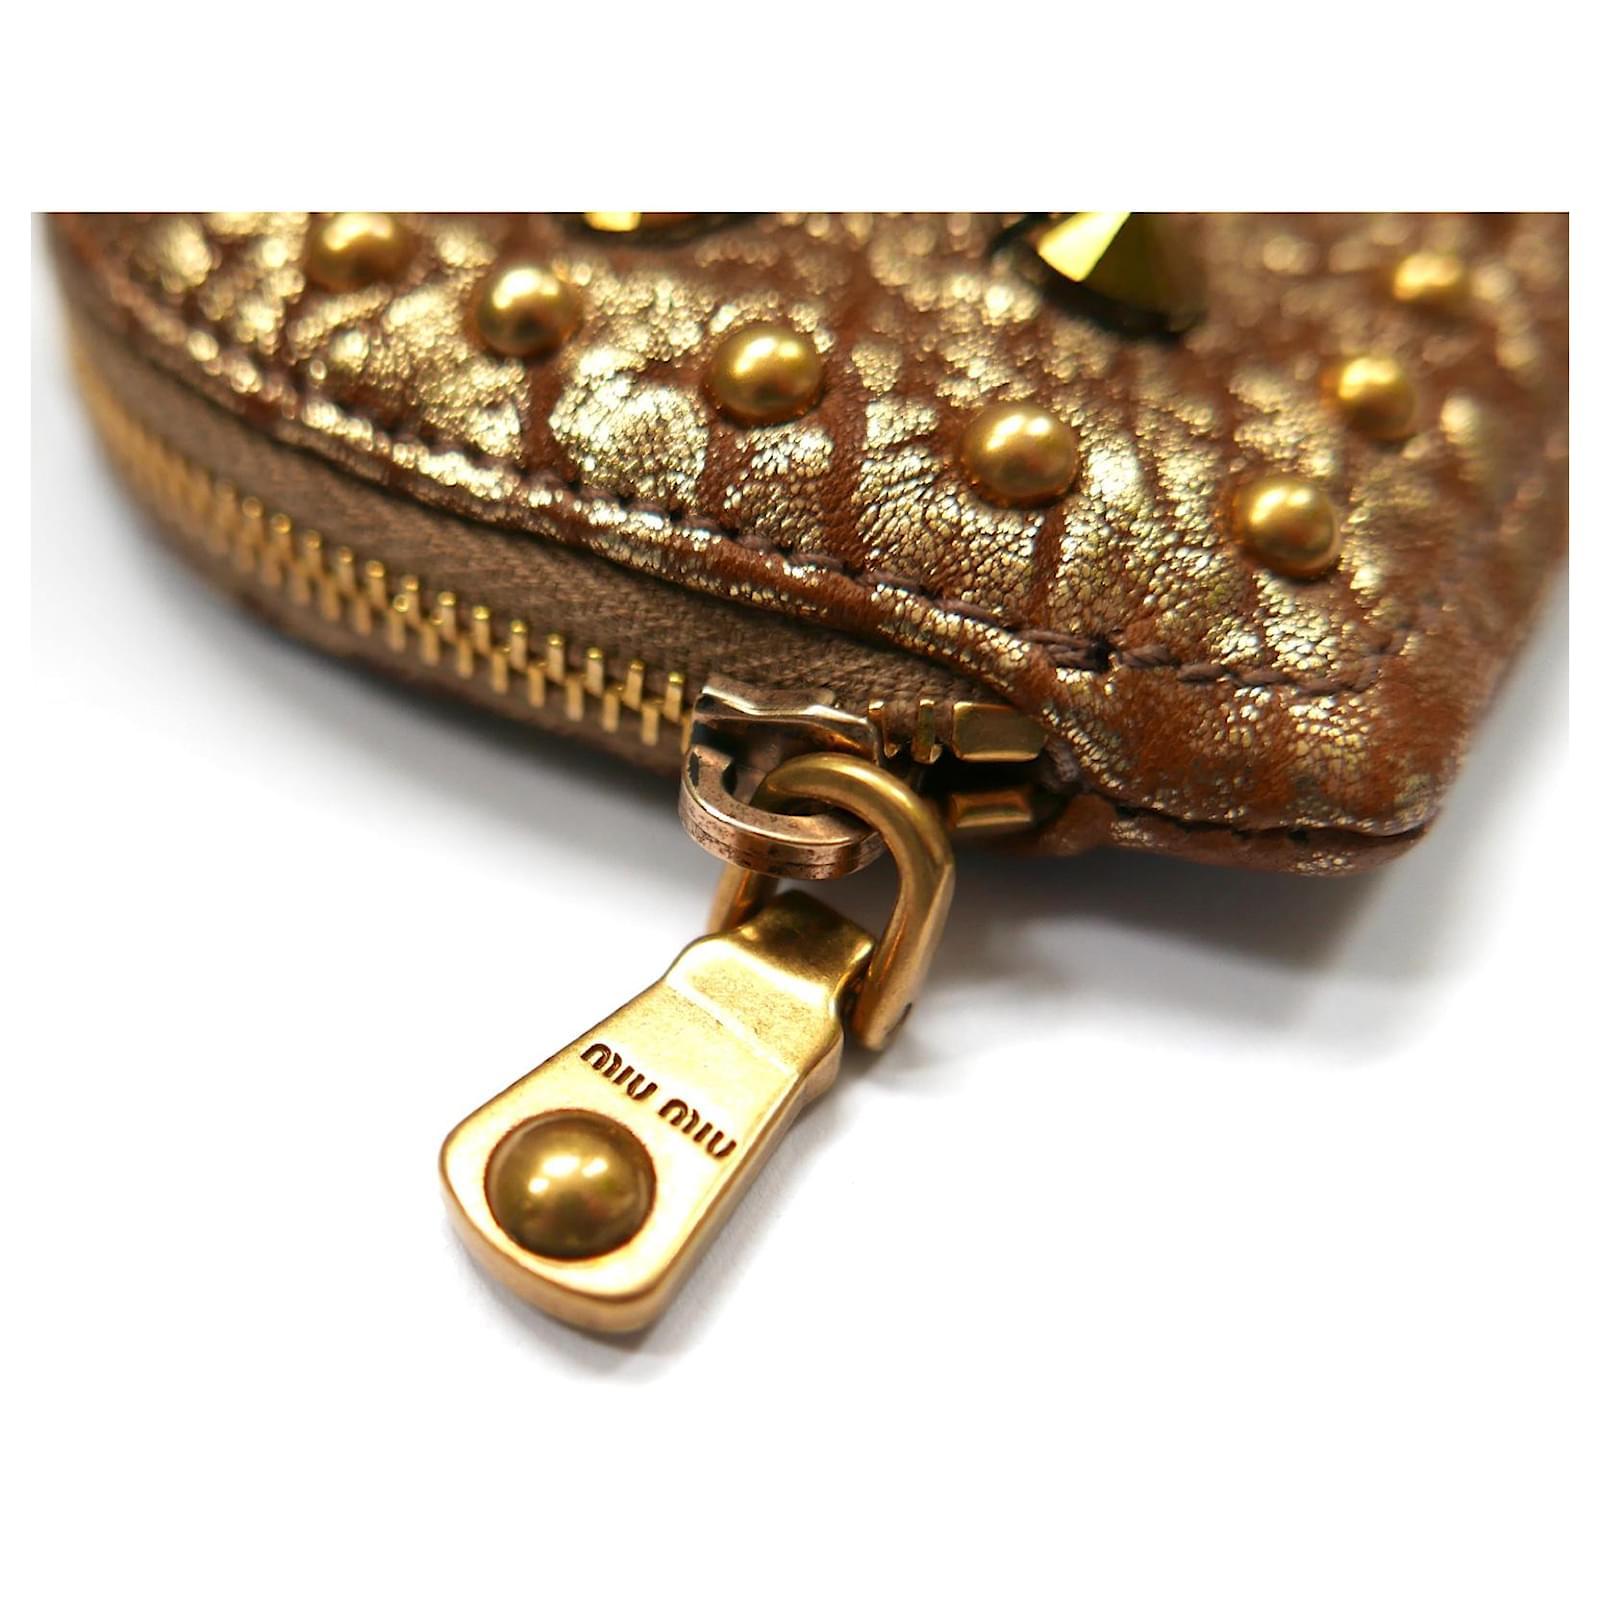 Adorable Miu Miu heart shaped coin purse - new with Net-A-Porter tag. Made from textured gold leather with studded front and chunky clip, keyring and fob. Lined in pink twill. Measures approx 4” x 3’


